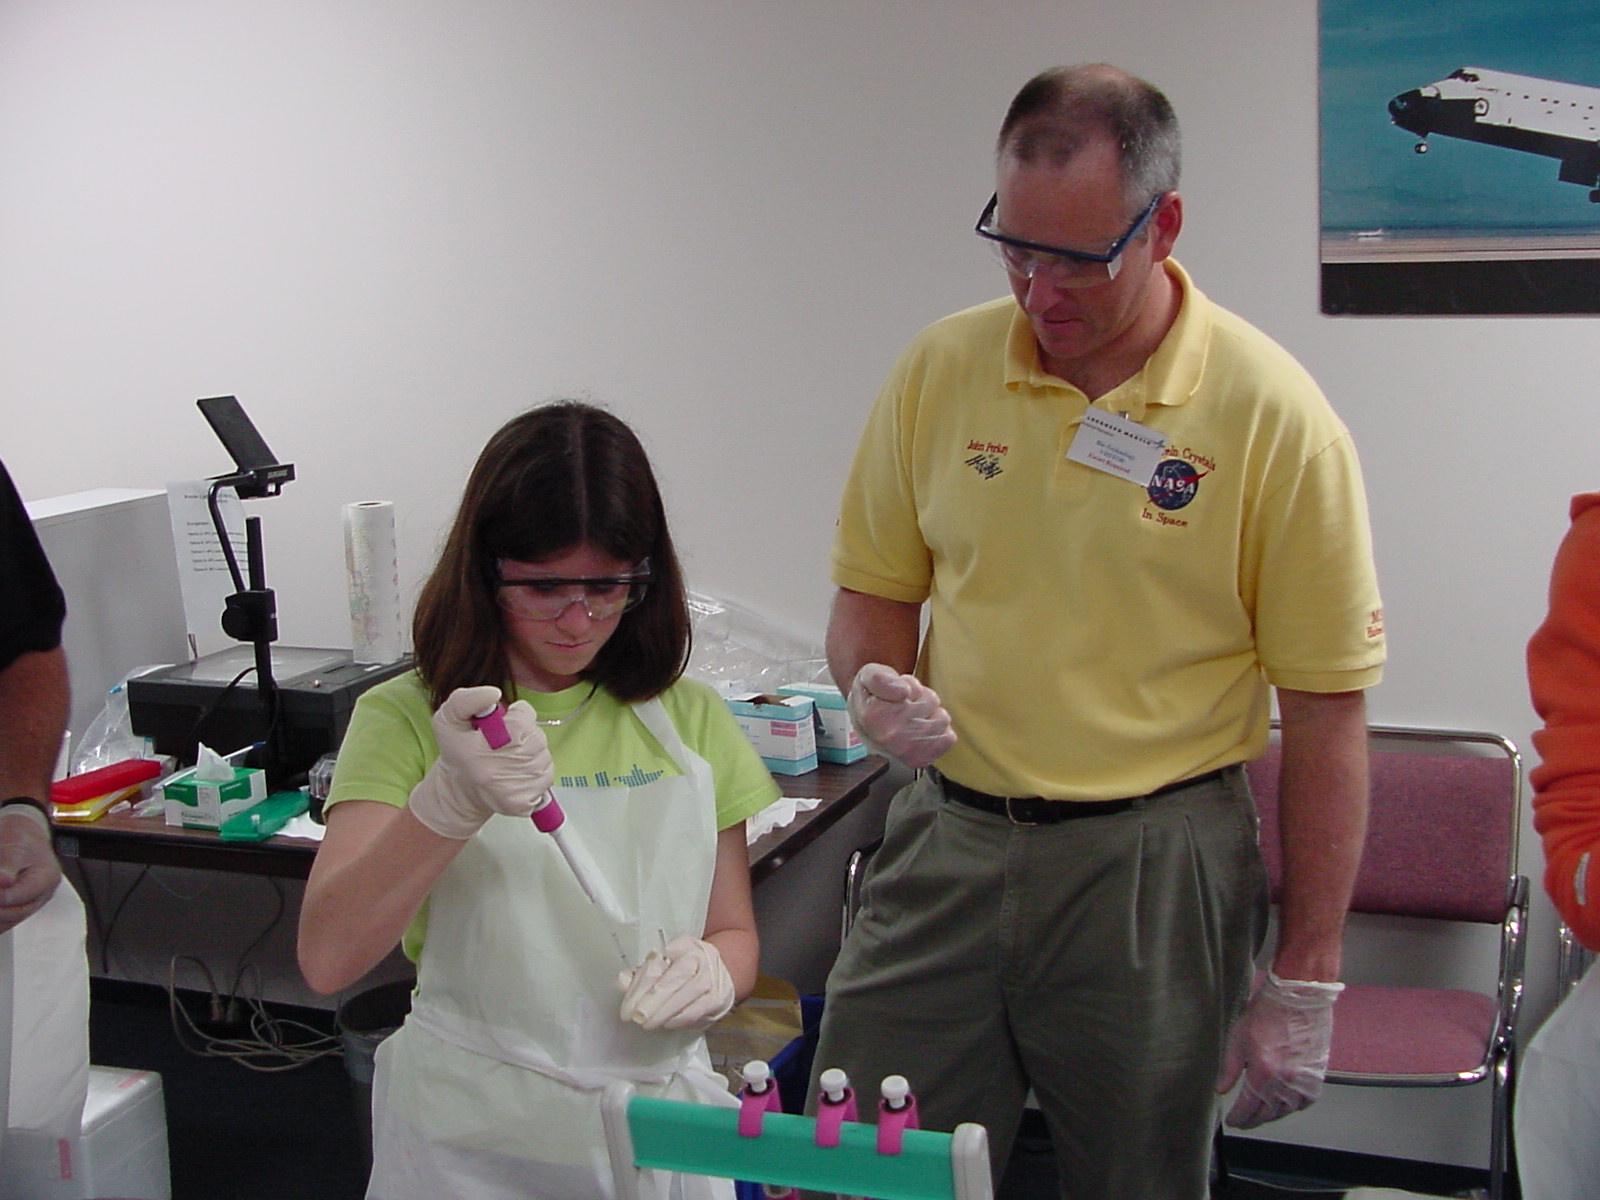 John Perkey helps student with the adjustable pipetter